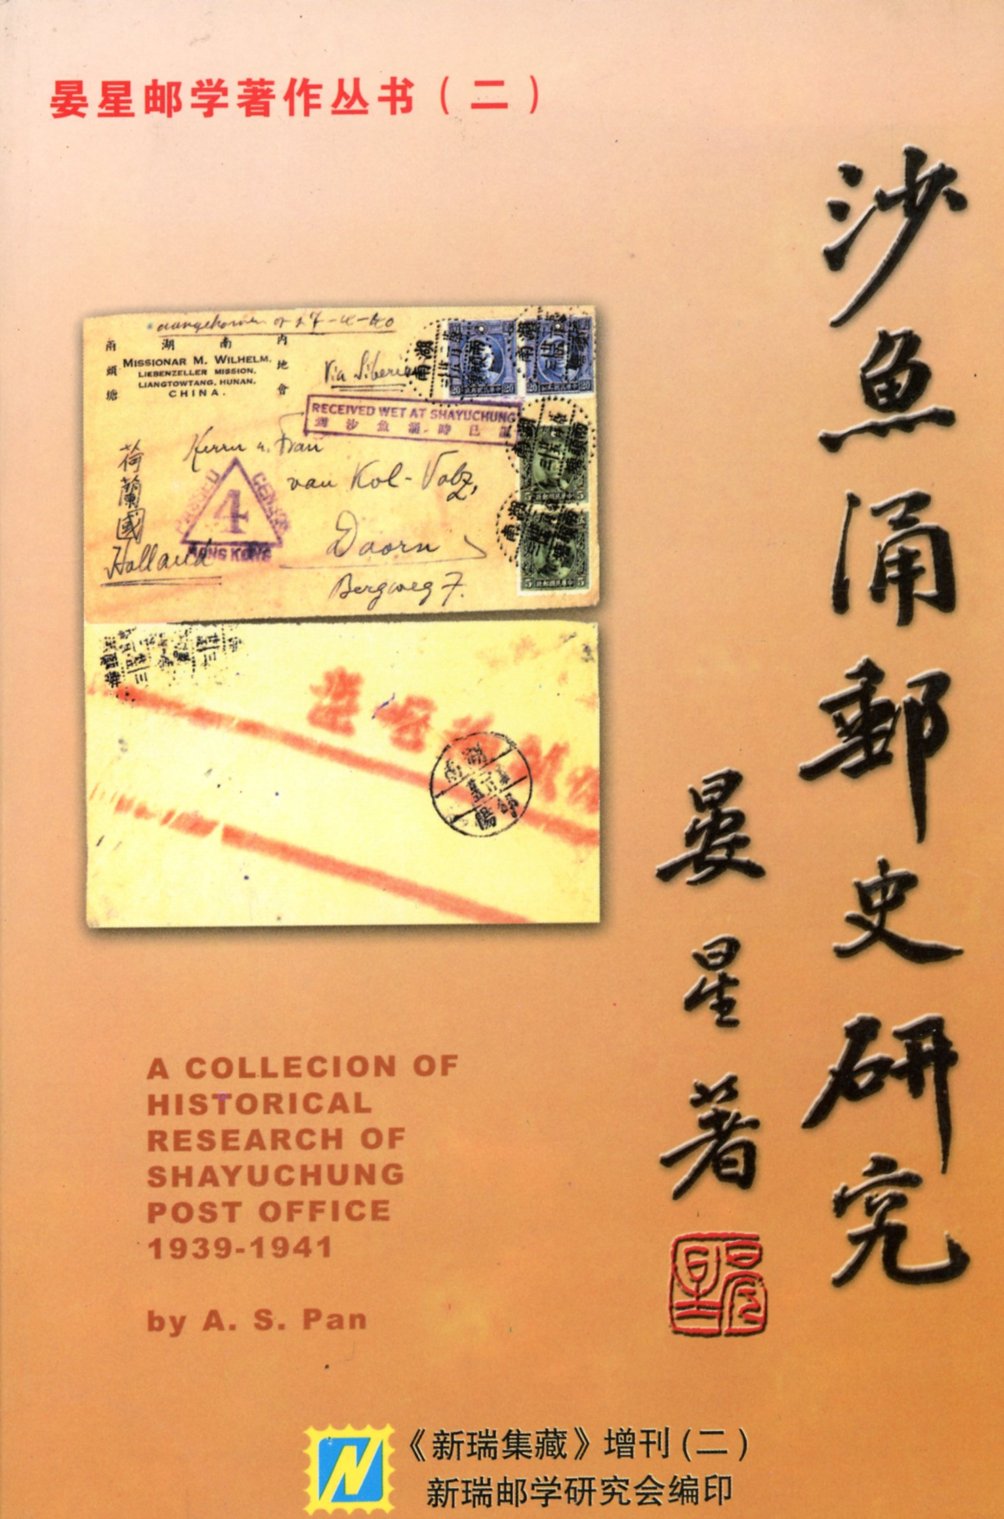 ShayuchongYoushiYanjiu (A Collection of Historical Research of Shayuchong Post Office 1931-1941, by A. S. Pan (2003), in Chinese, in very good condition. (12 oz)